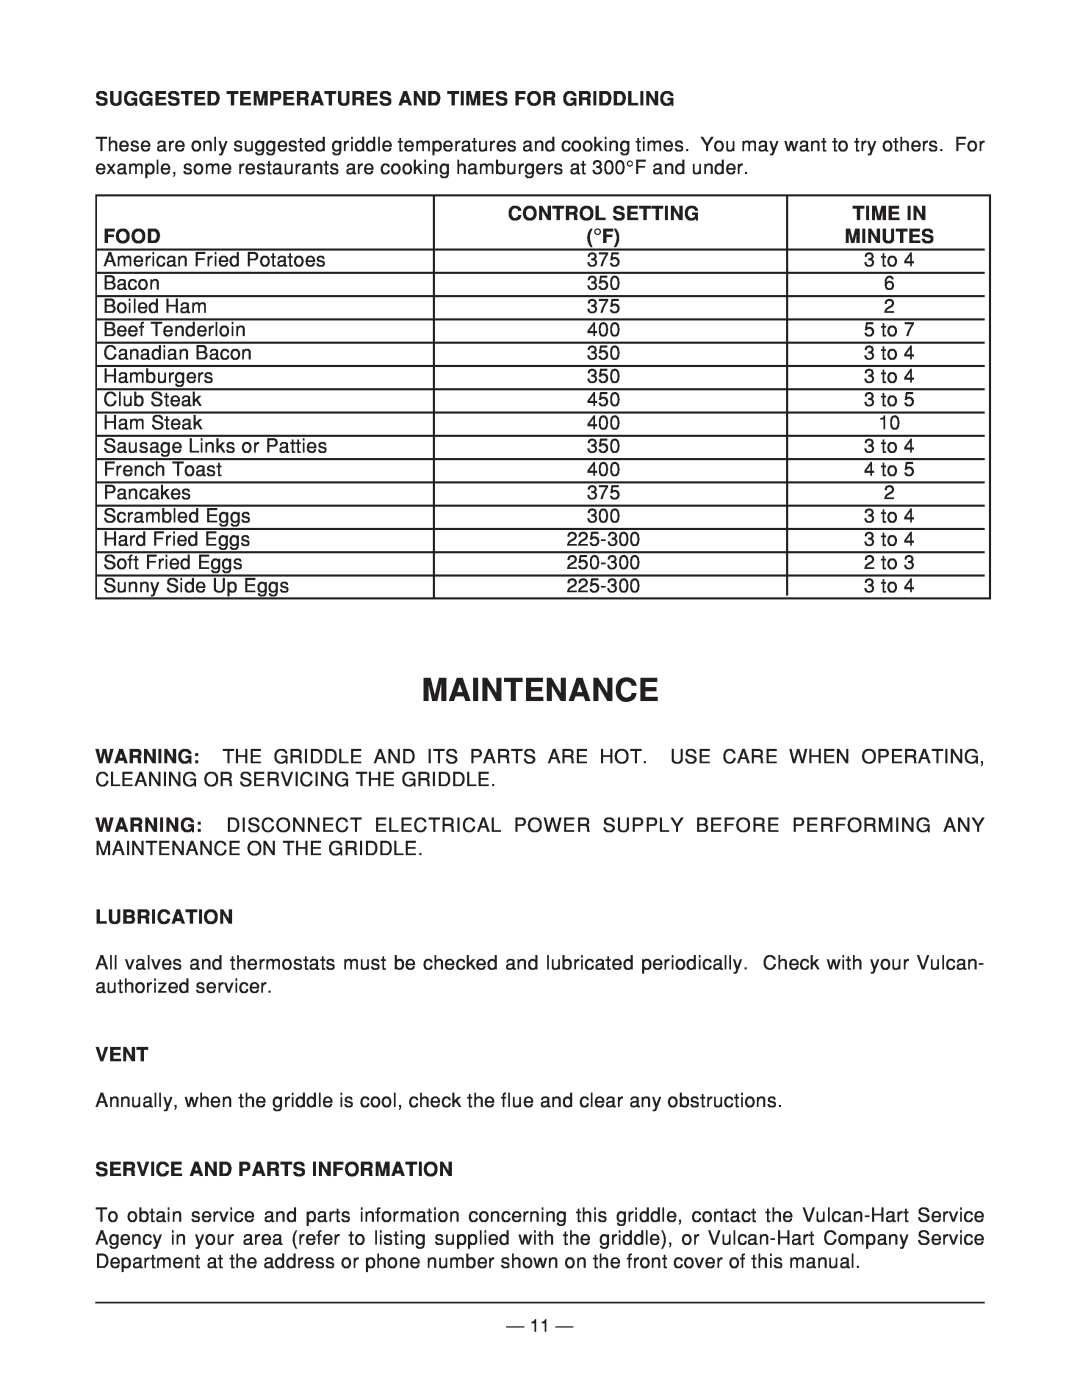 Vulcan-Hart MGG24 Maintenance, Suggested Temperatures And Times For Griddling, Control Setting, Time In, Food, Lubrication 